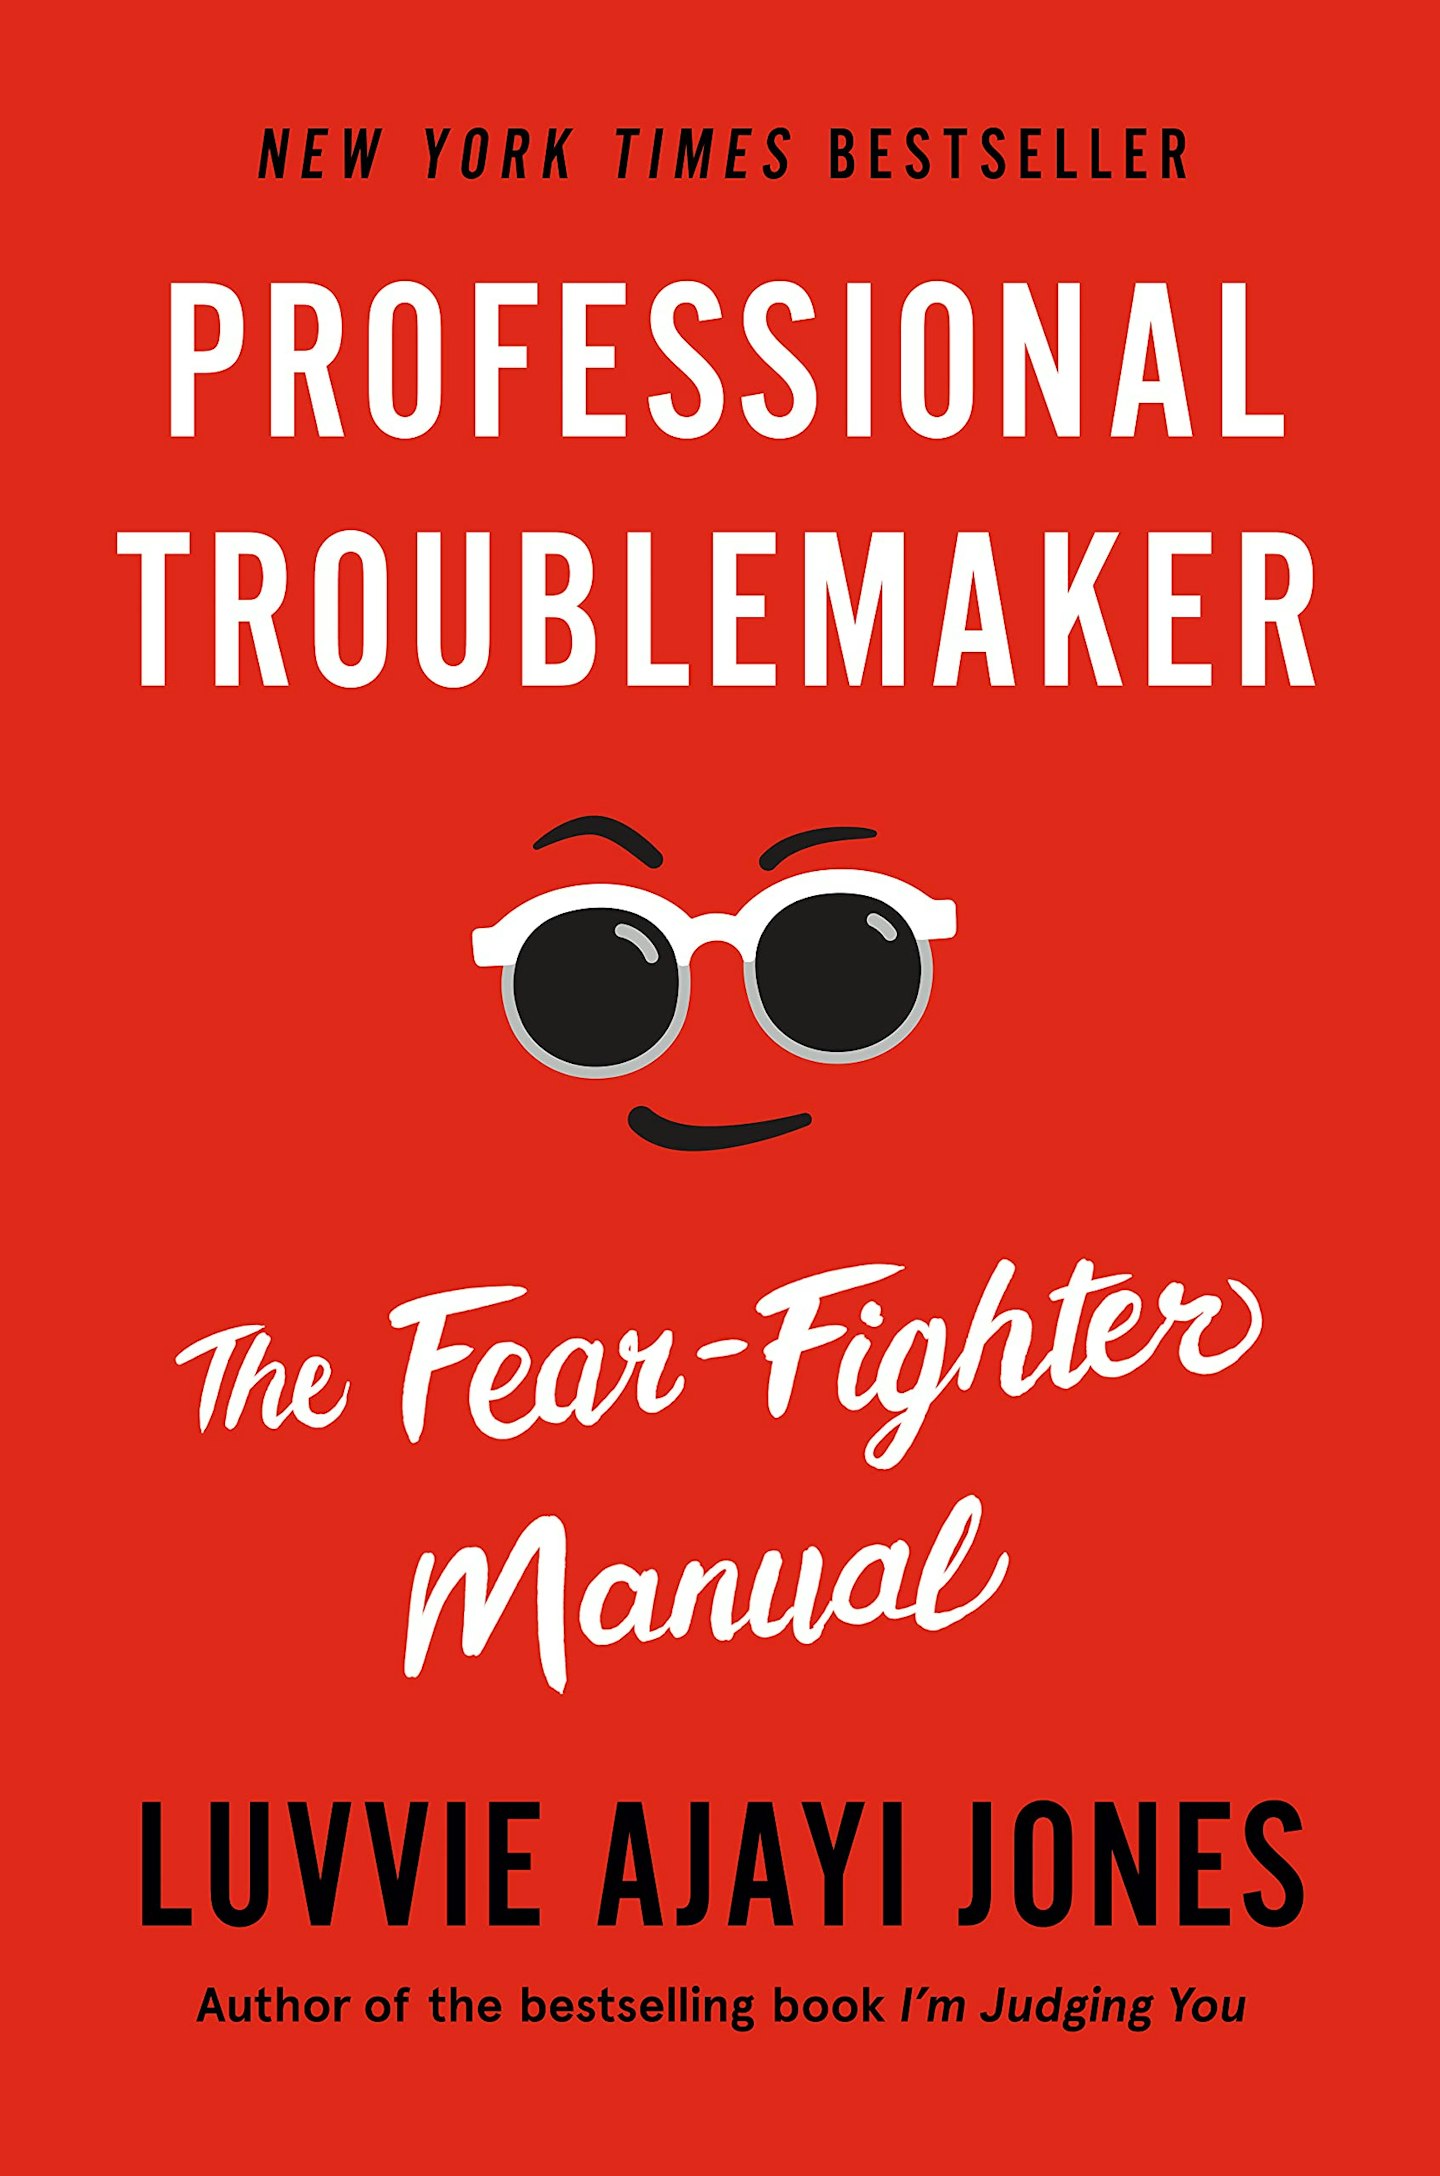 The Fear-Fighter Manual: Professional Troublemaker by Luvvie Ajayi Jones